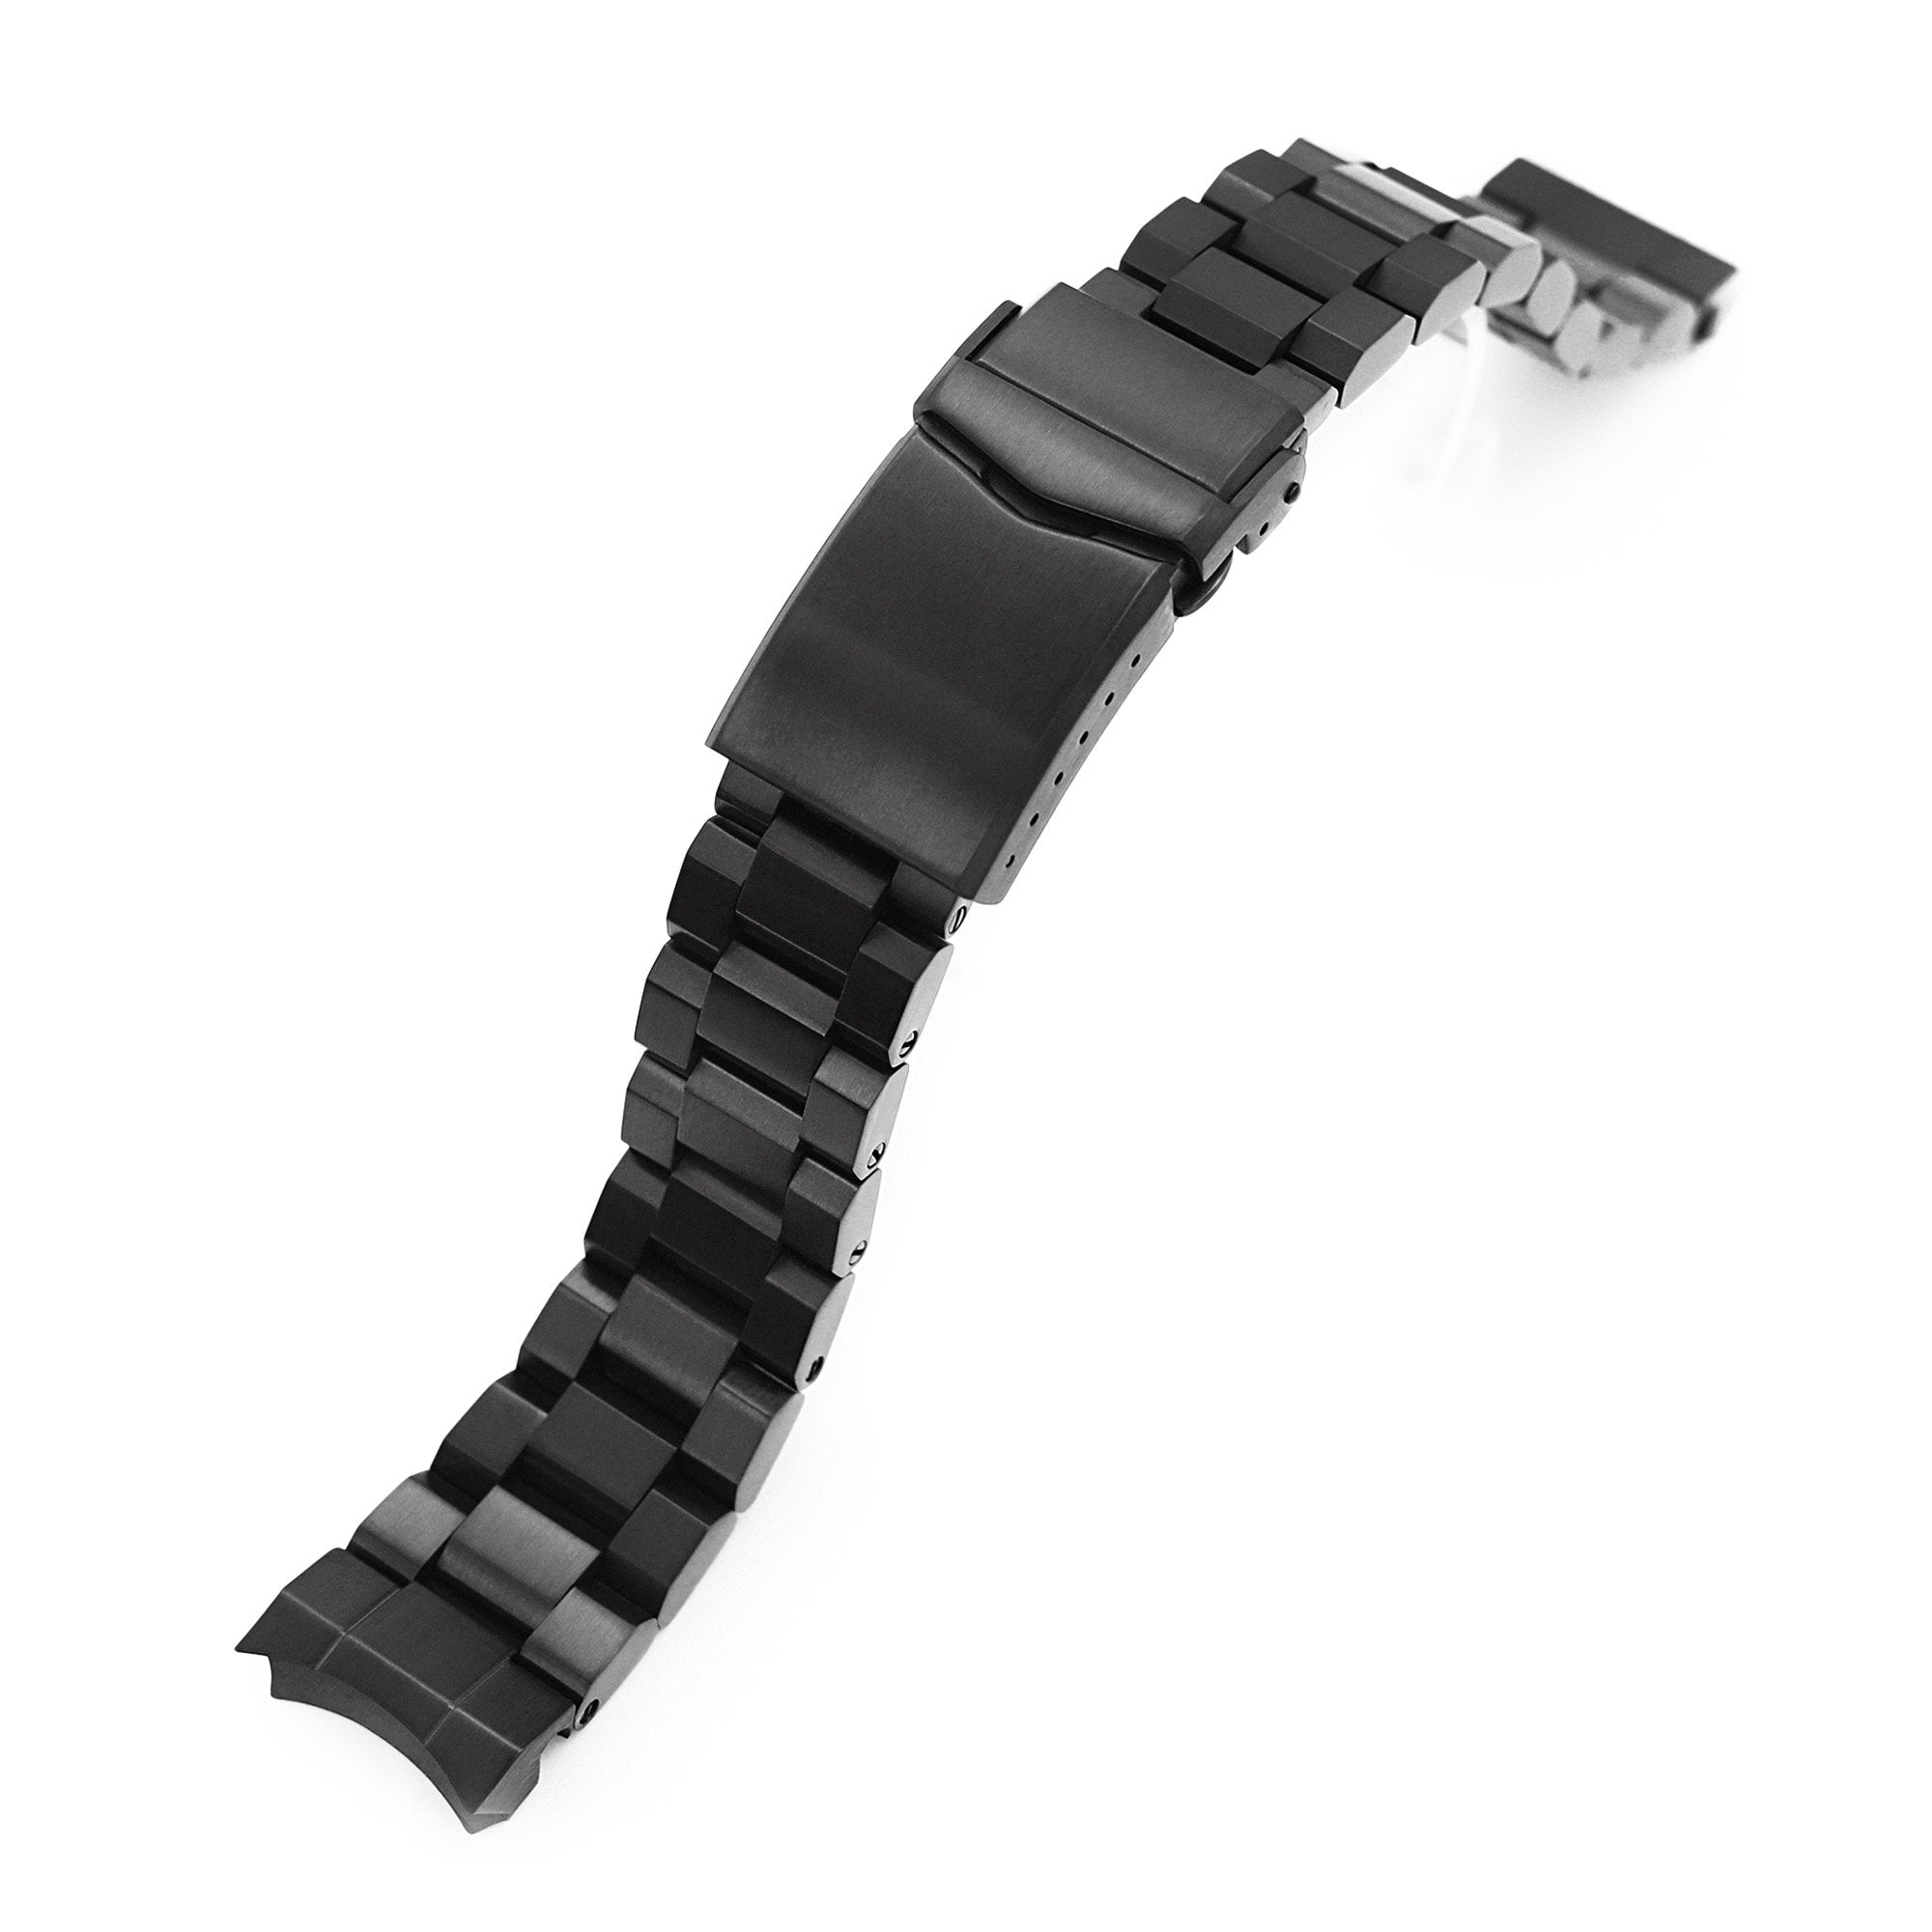 20mm Hexad 316L Stainless Steel Watch Band for Seiko Sumo SBDC001, Diamond-like Carbon (DLC Black) V-Clasp Strapcode Watch Bands